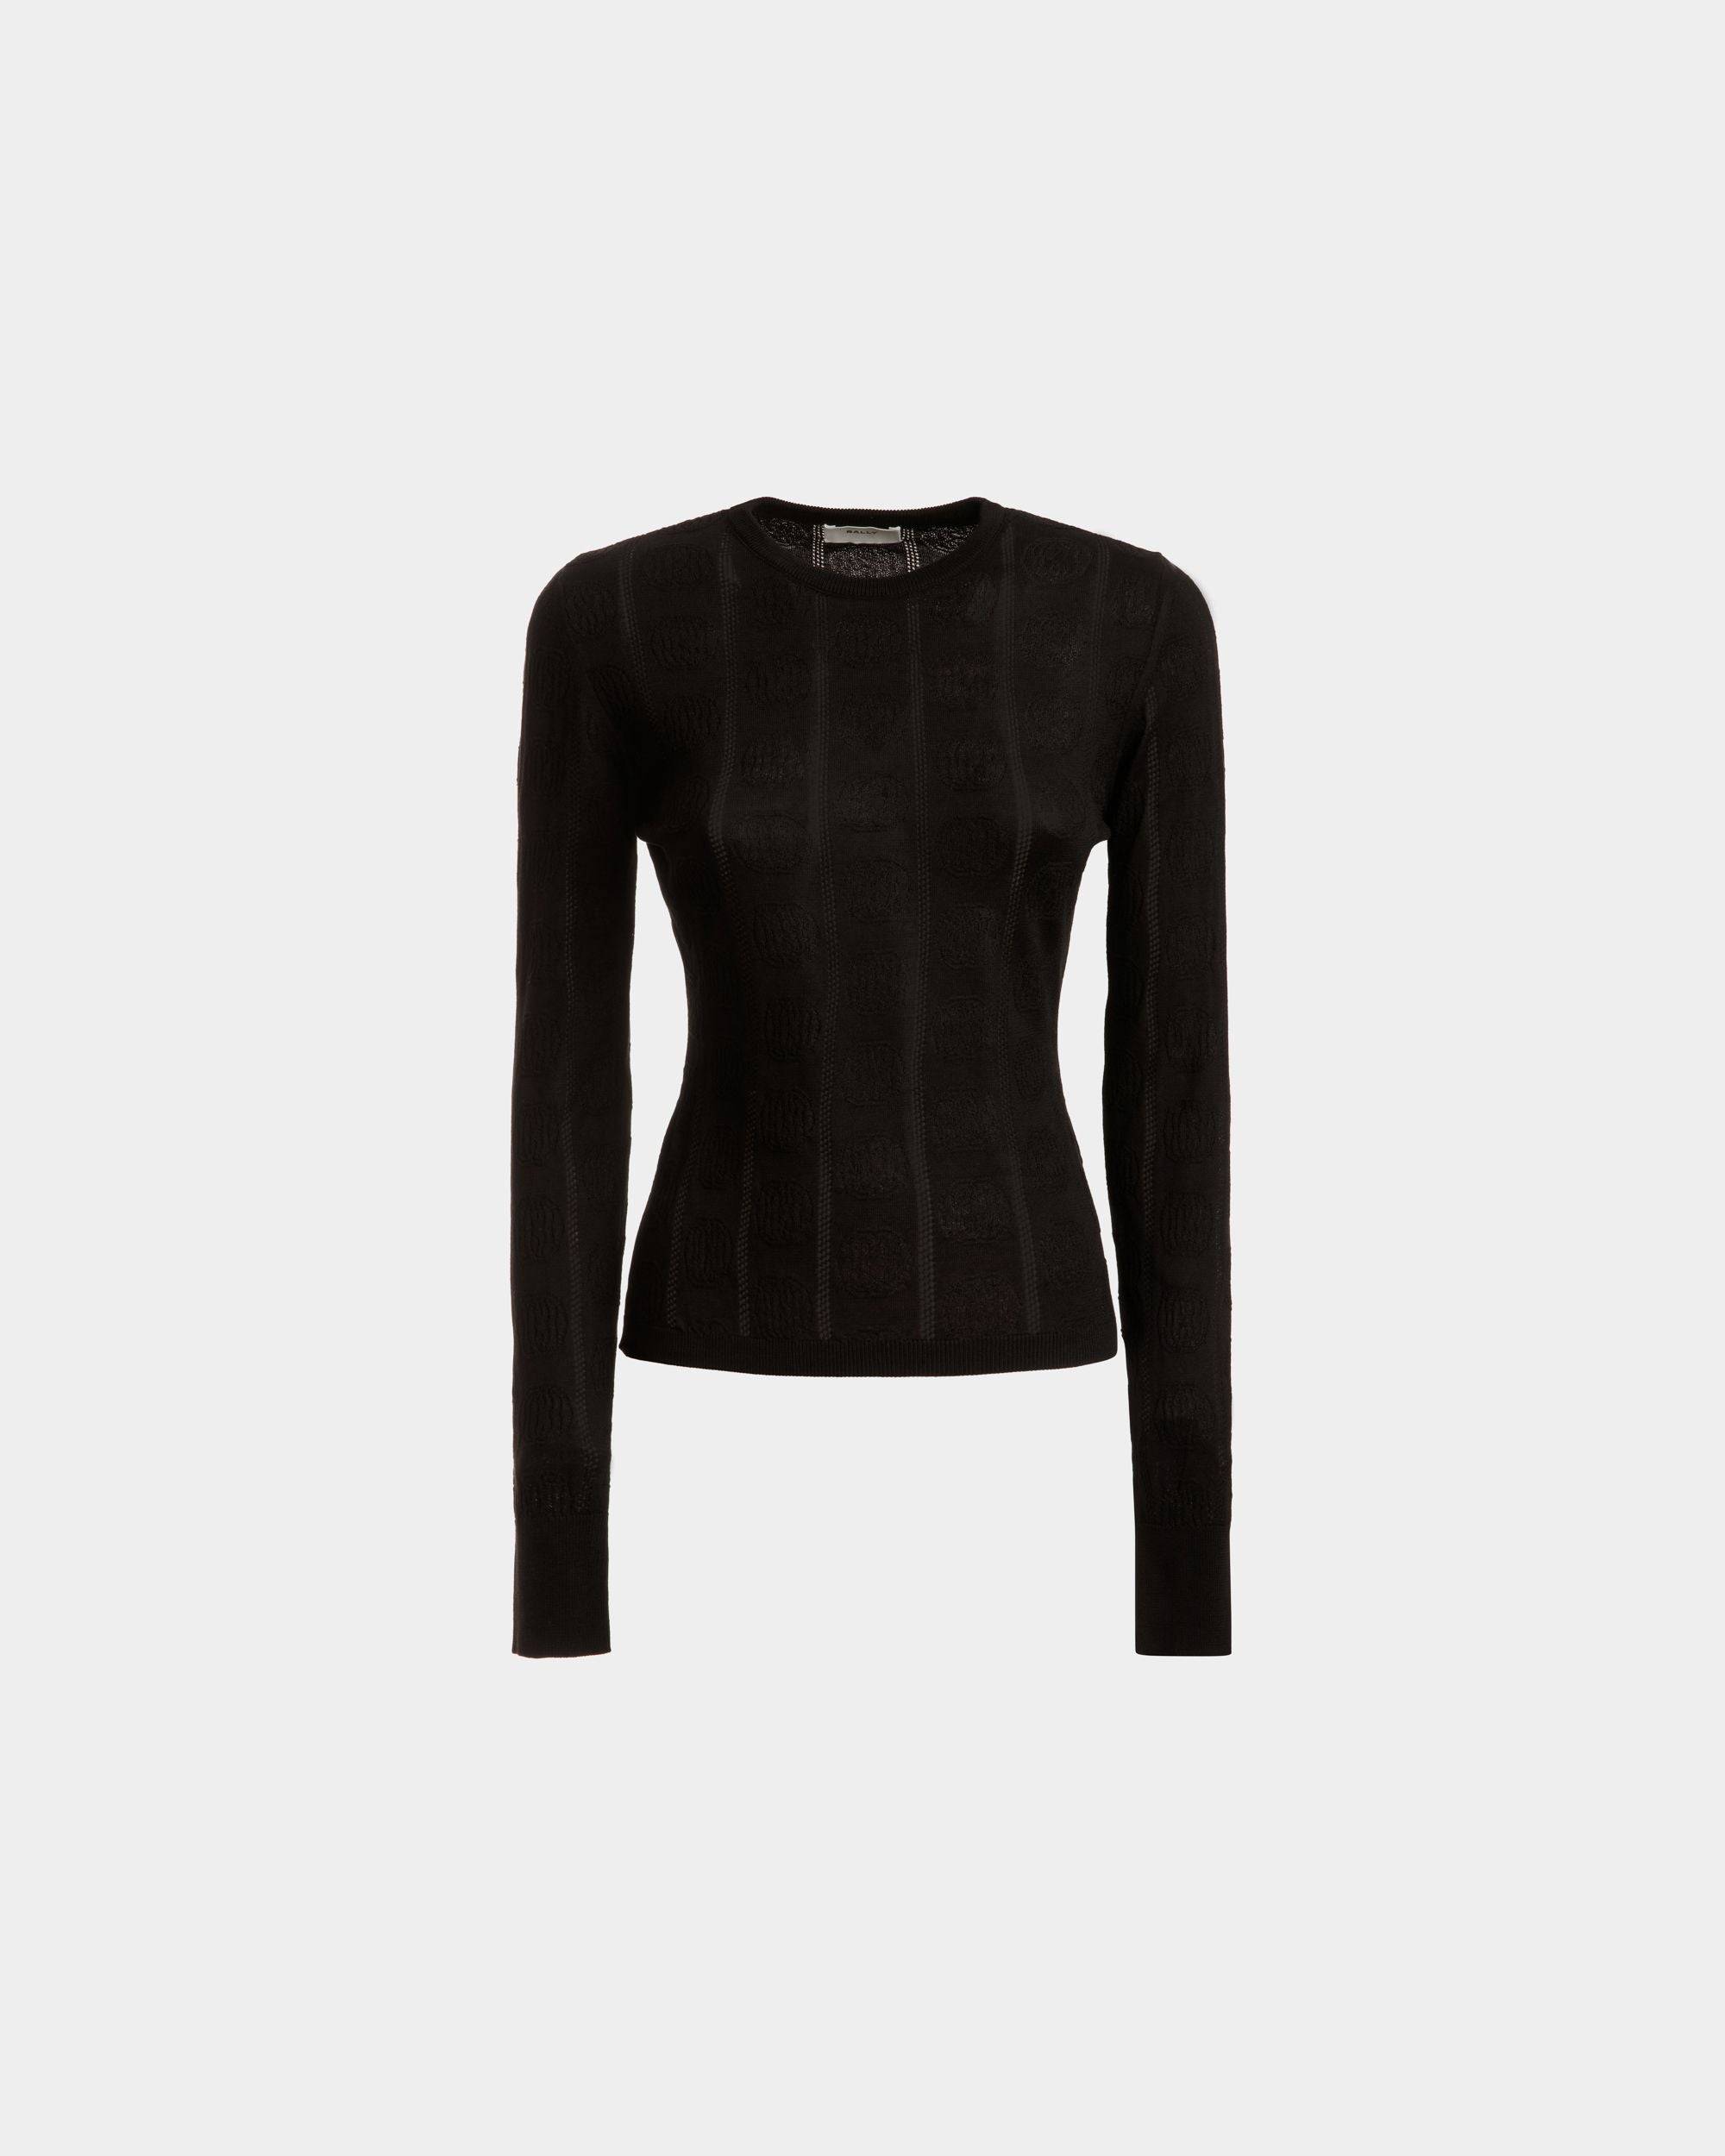 Women's Crewneck Top In Black Cotton And Silk | Bally | Still Life Front